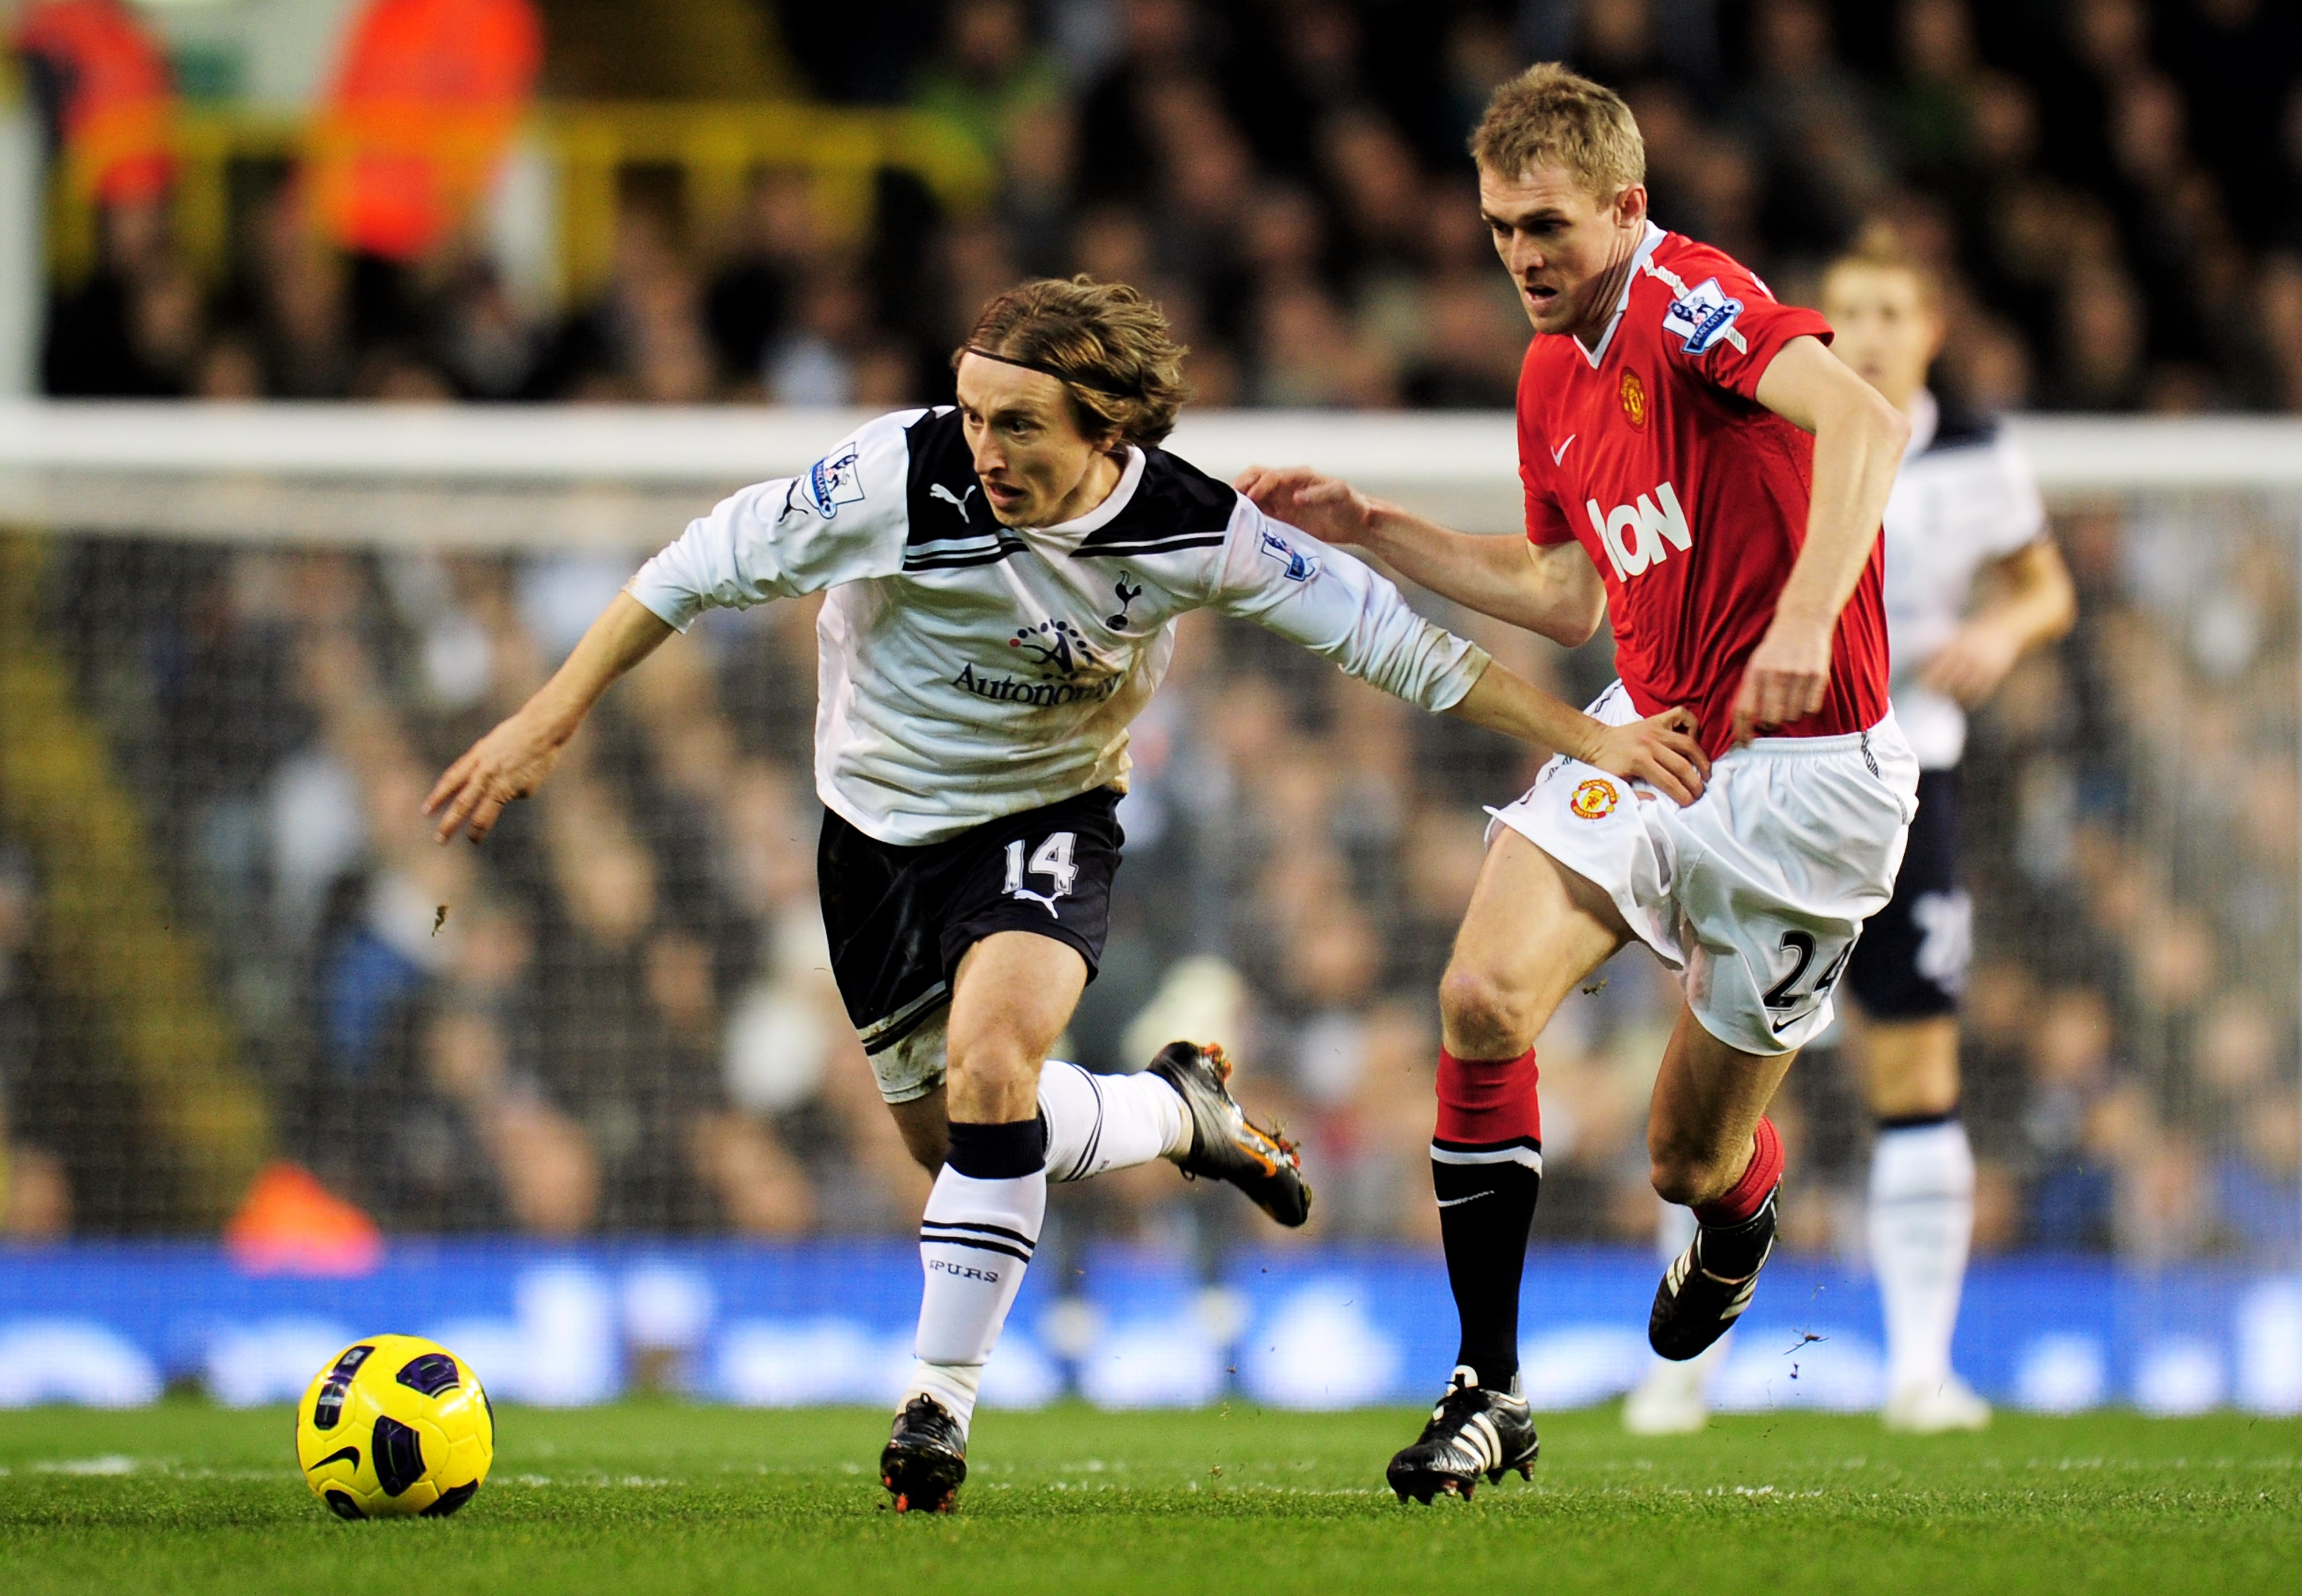 LONDON, ENGLAND - JANUARY 16:  Luka Modric of Spurs is pursued by Darren Fletcher of Manchester United during the Barclays Premier League match between Tottenham Hotspur and Manchester United at White Hart Lane on January 16, 2011 in London, England.  (Ph